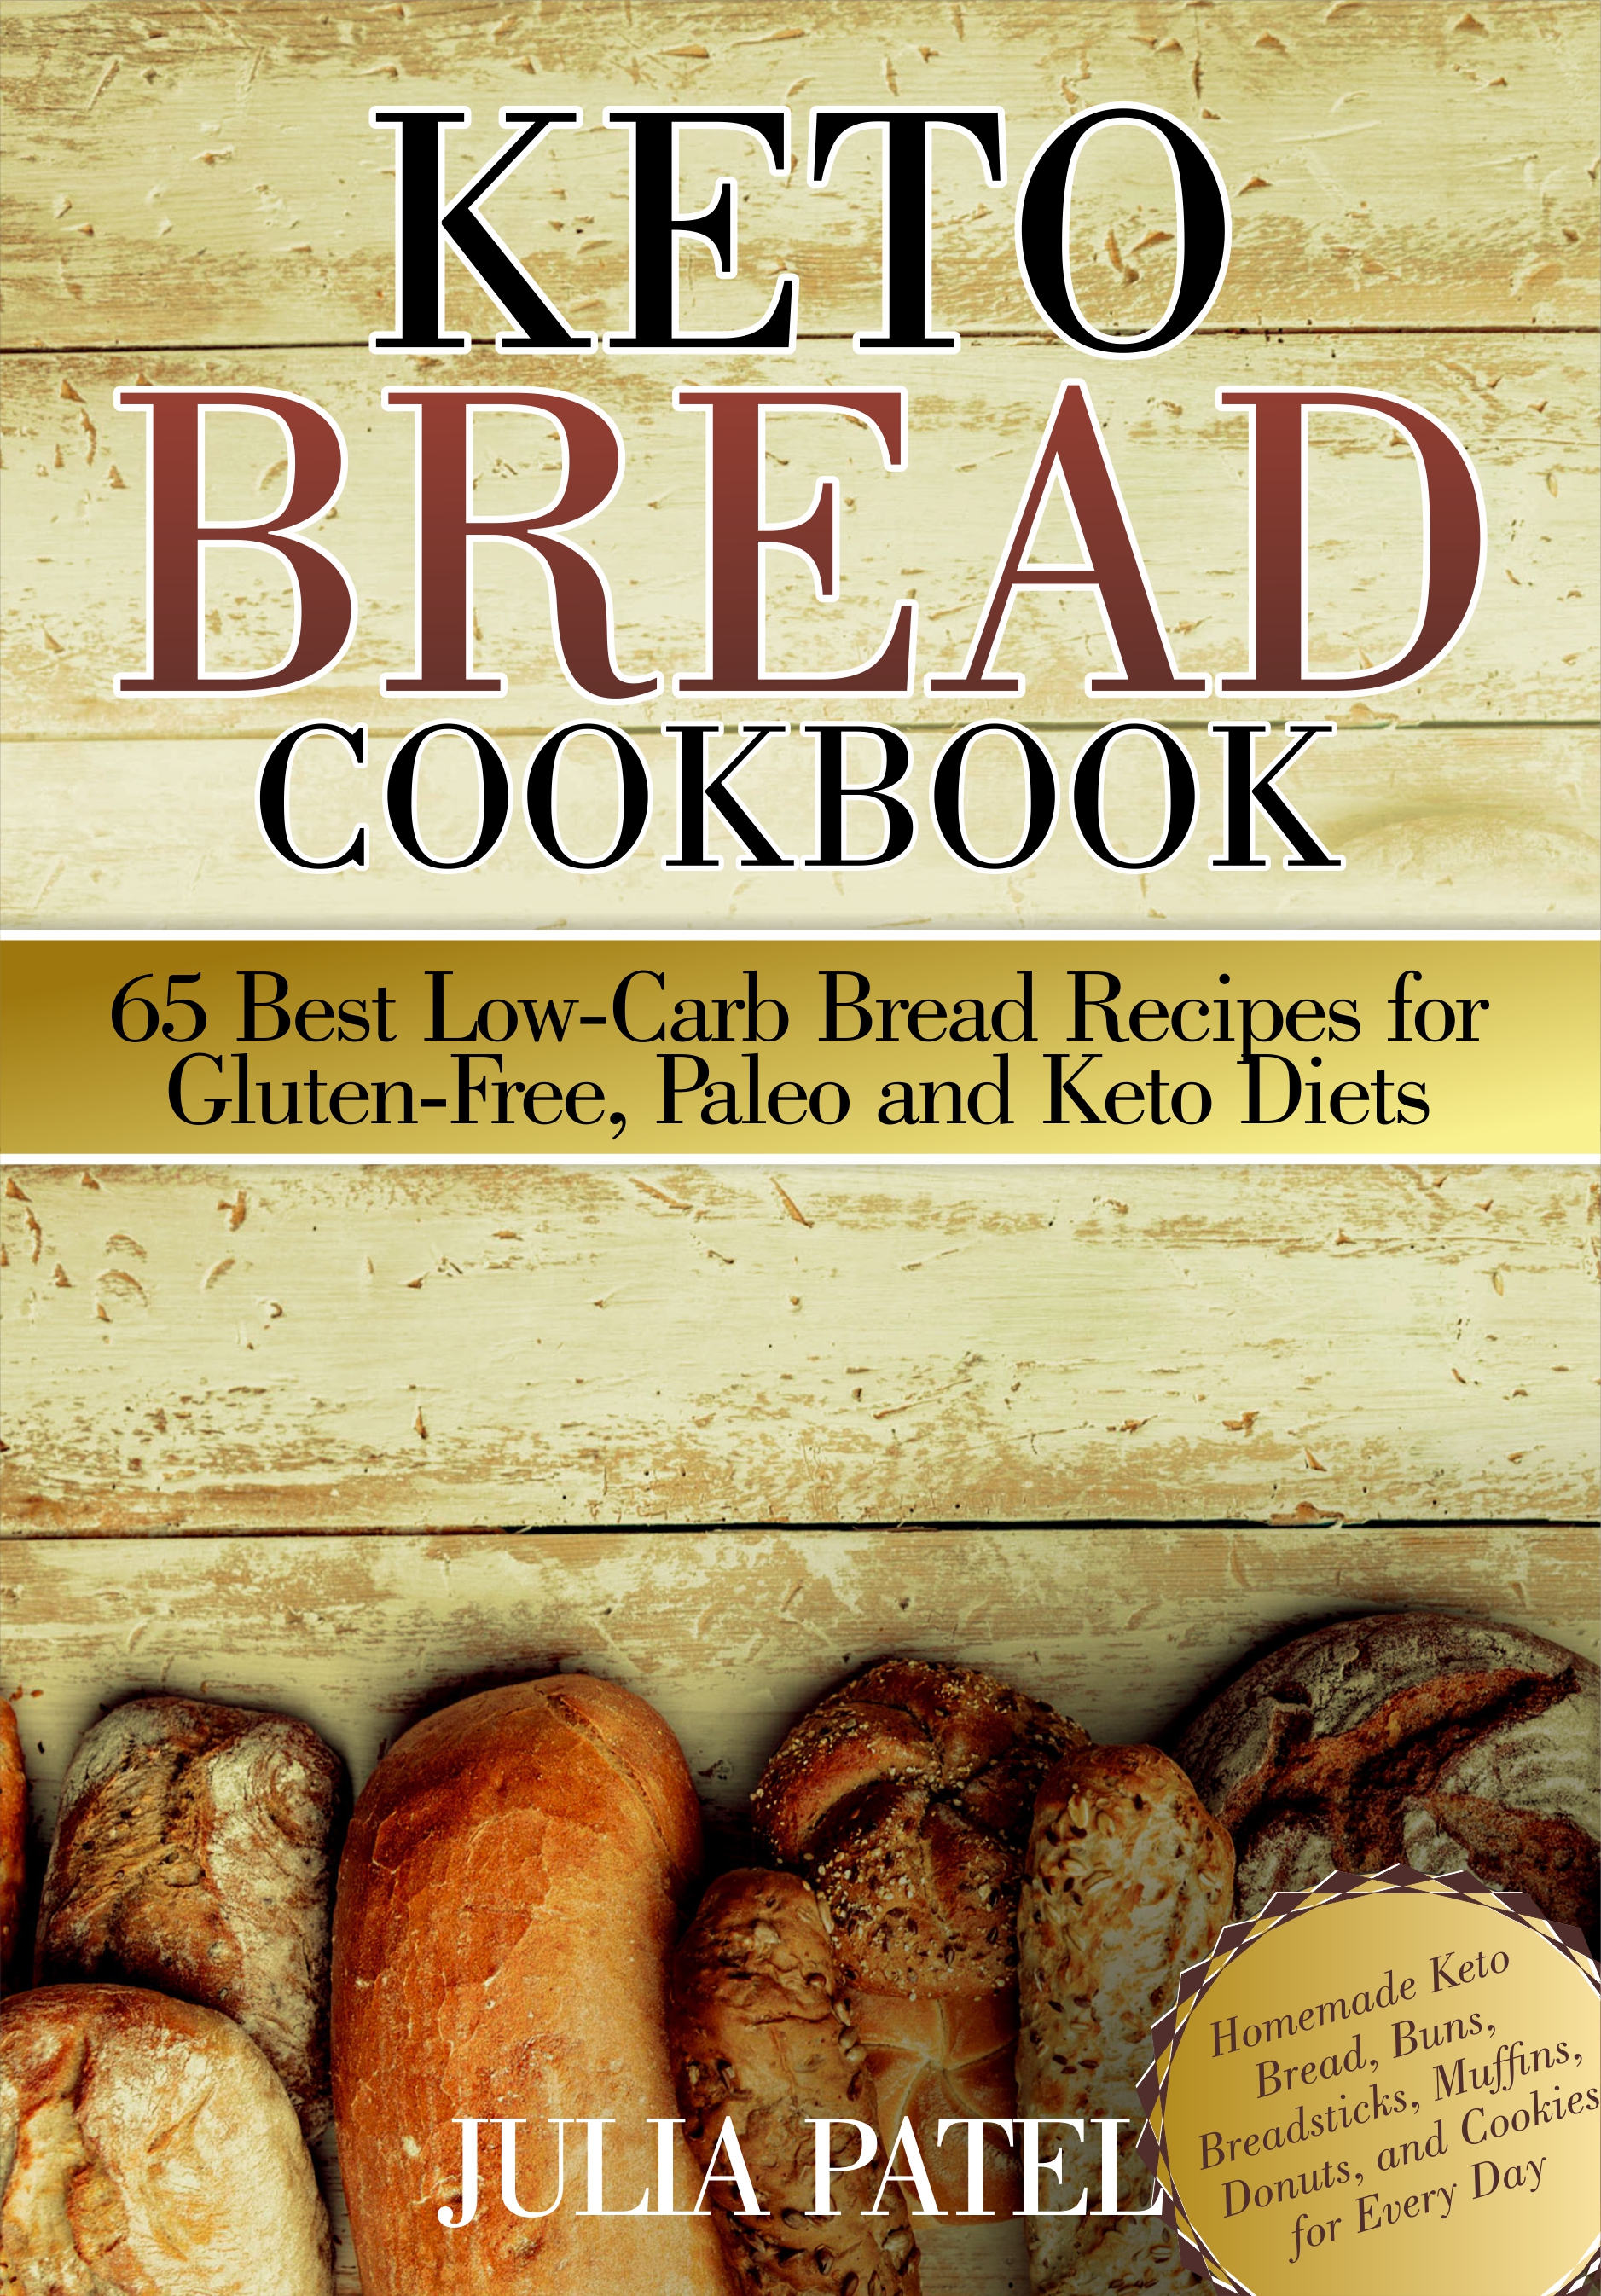 FREE: Keto Bread Cookbook: 65 Best Low-Carb Bread Recipes for Gluten-Free, Paleo and Keto Diets: Homemade Keto Bread, Buns, Breadsticks, Muffins, Donuts, and Cookies for Every Day by Julia Patel